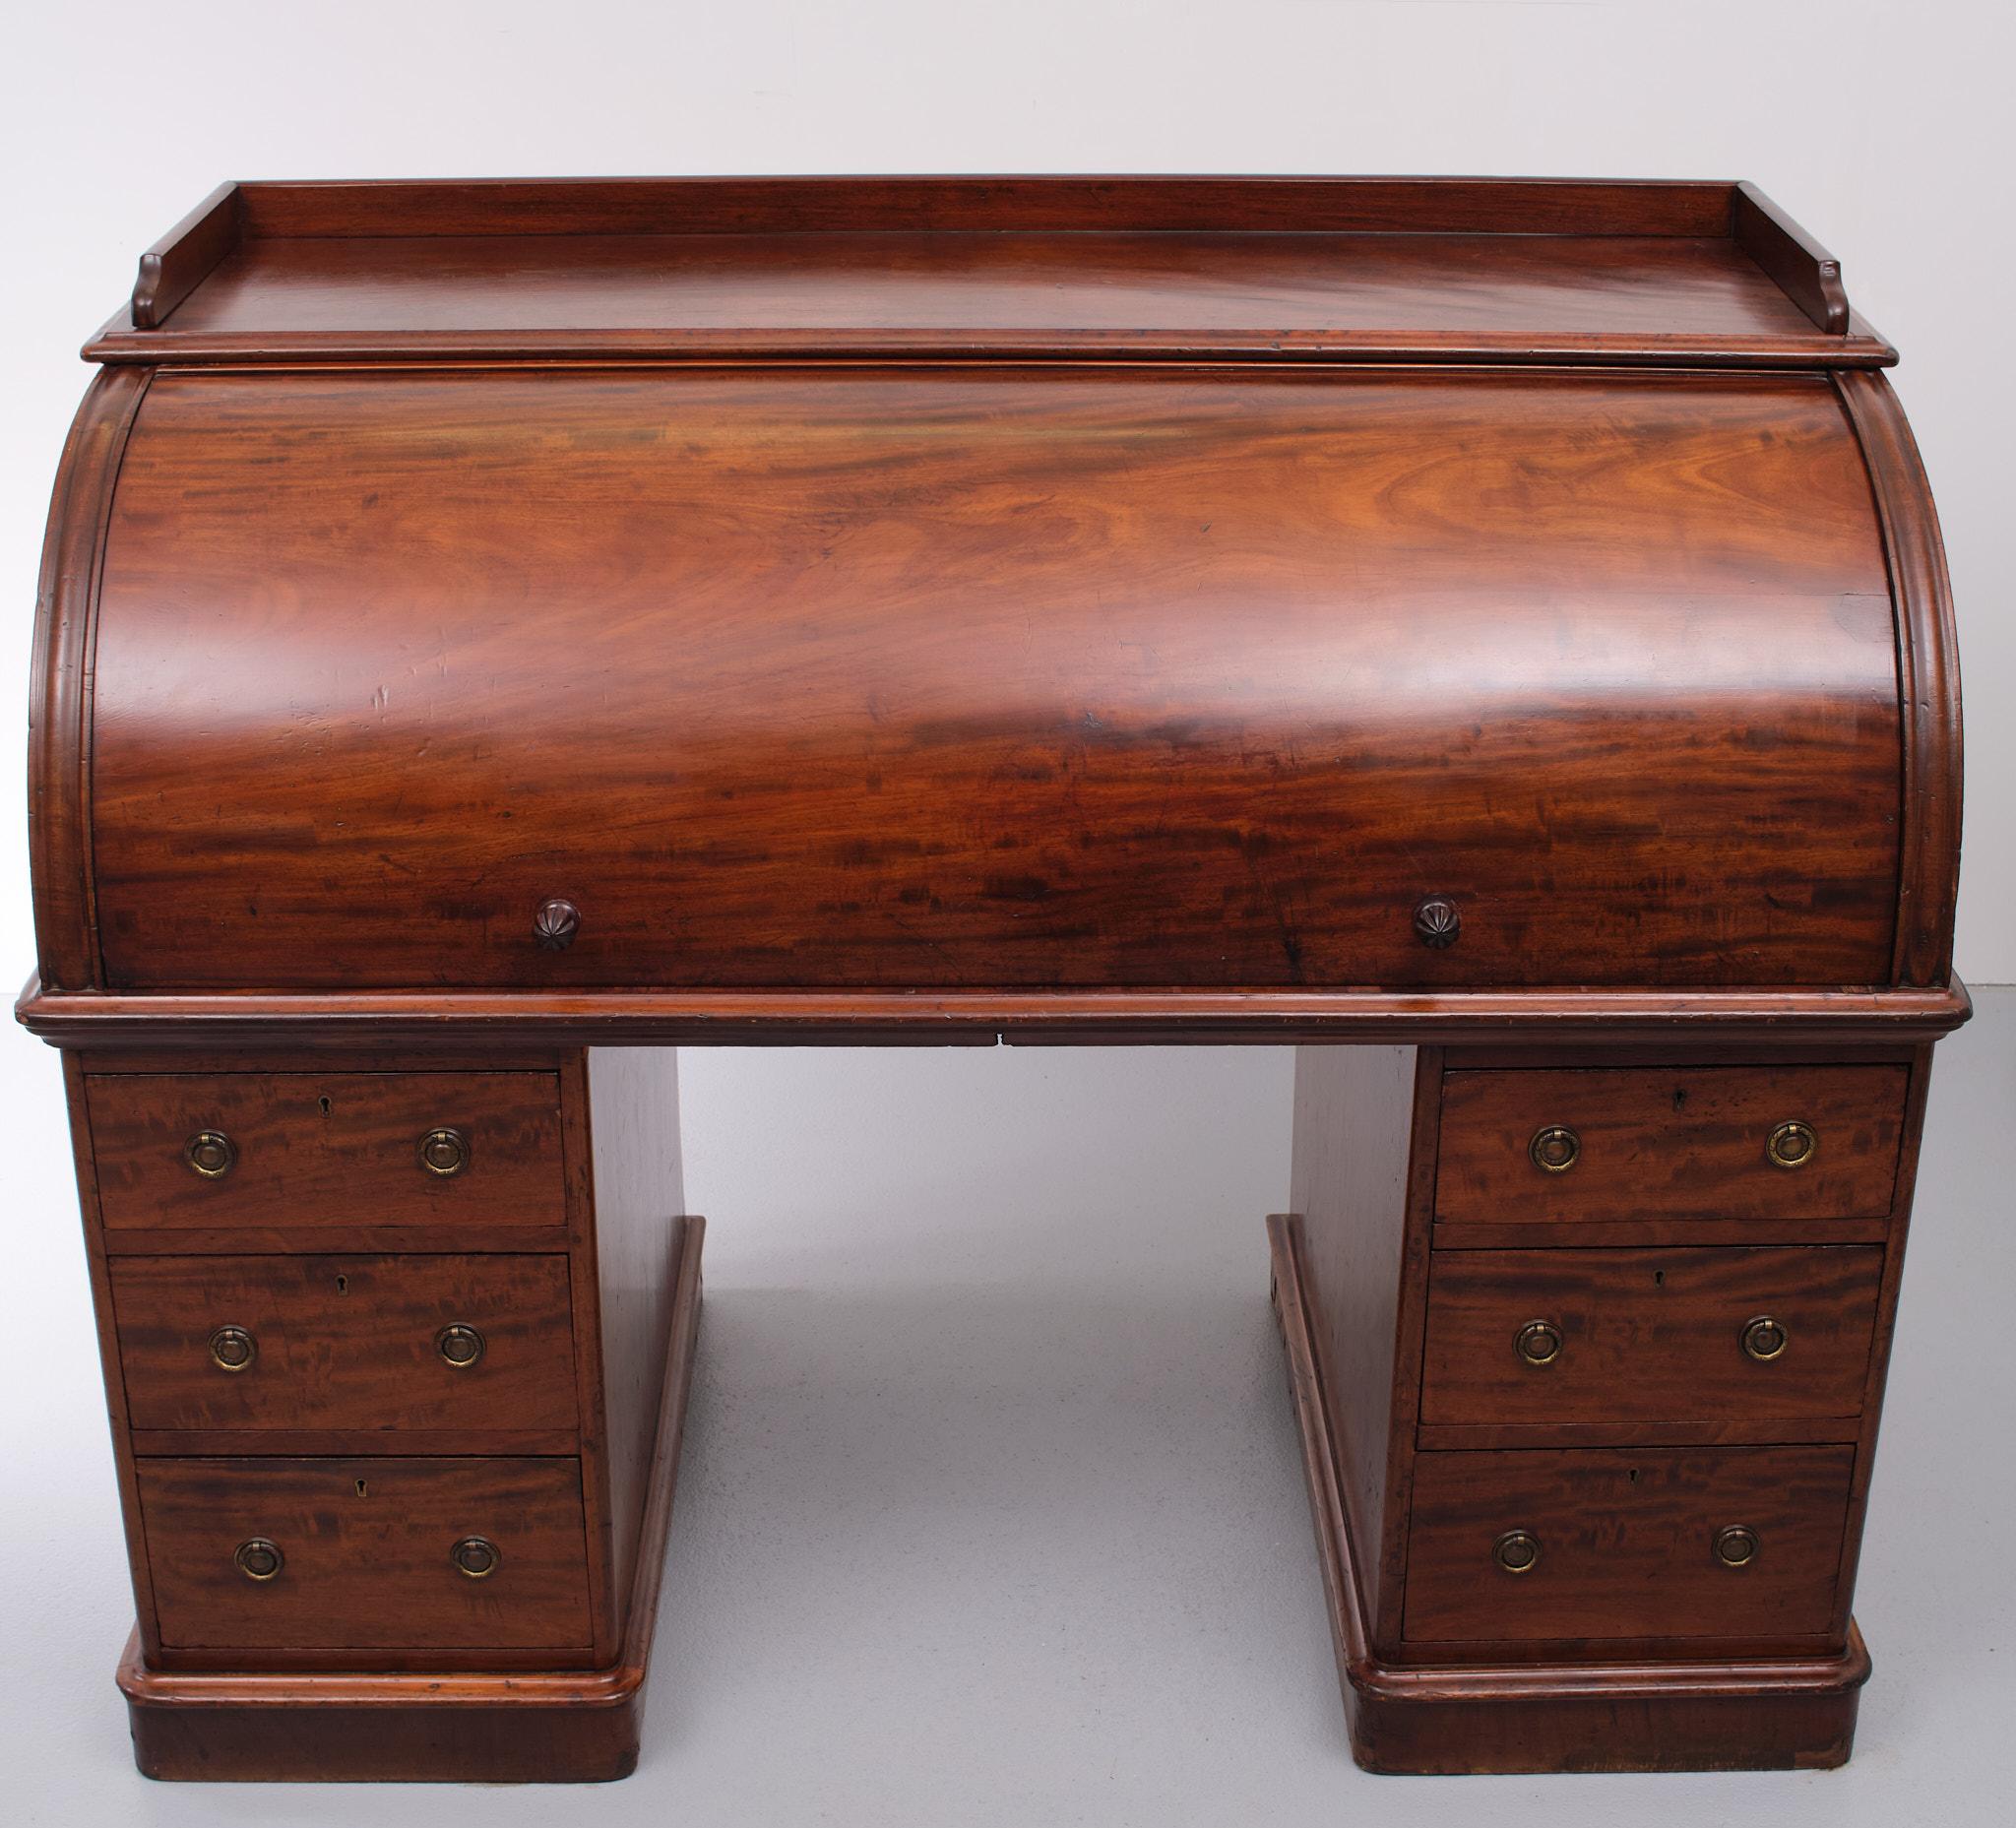 A truly outstanding piece of Victorian mahogany antique furniture this beautiful flamed mahogany cylinder desk features a small up stand to top, a large barrel fronted desk compartment, and a quality fitted interior. The inside of the desk features